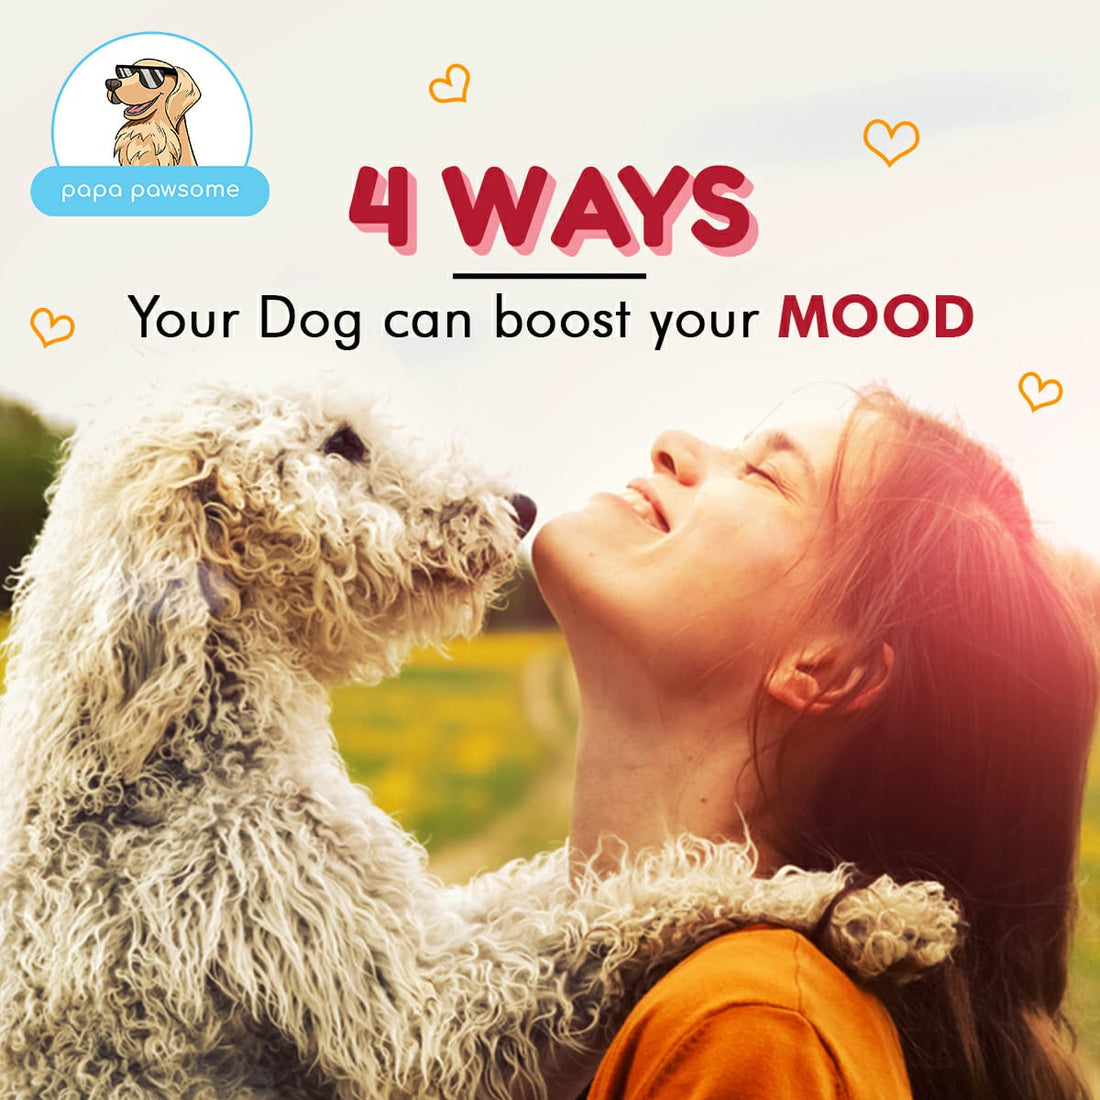 4 ways your dogs can boost your mood - Papa Pawsome